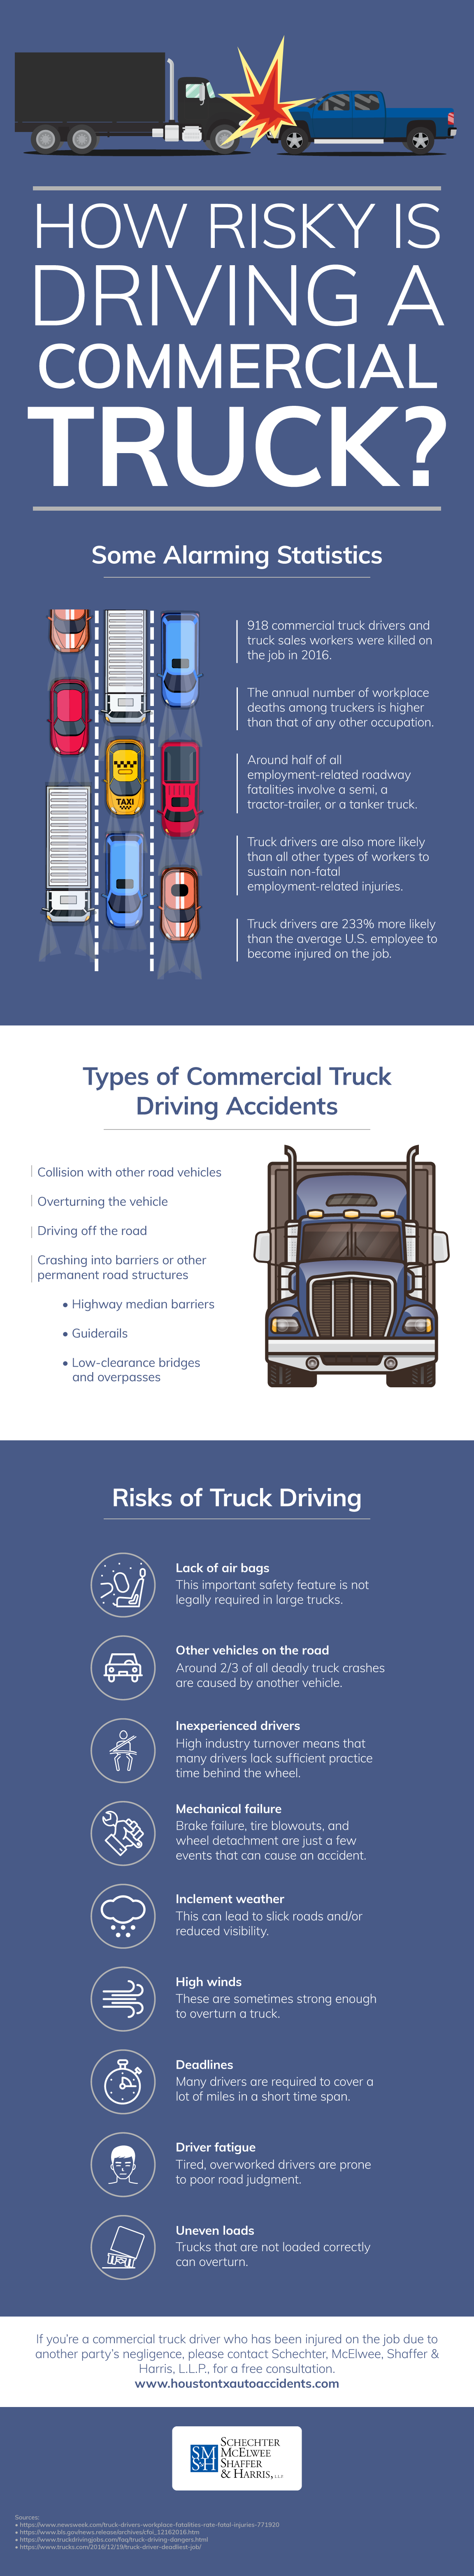 Commercial Driving Risk Factors Infographic